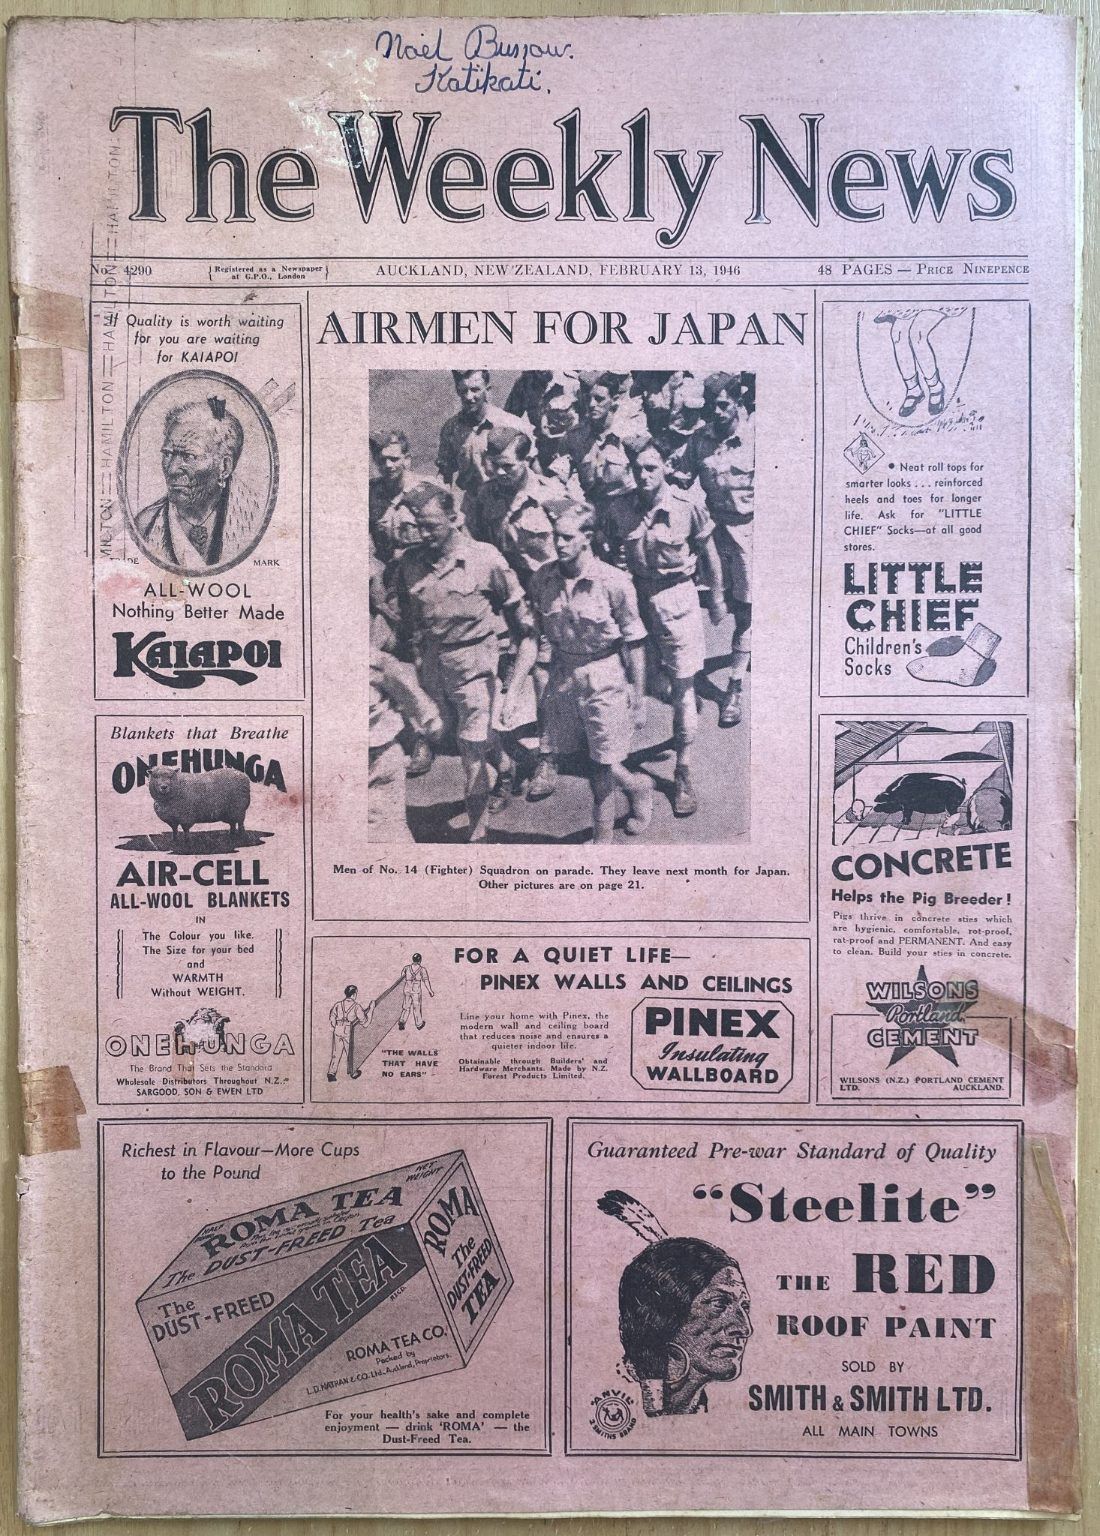 OLD NEWSPAPER: The Weekly News - No. 4290, 13 February 1946